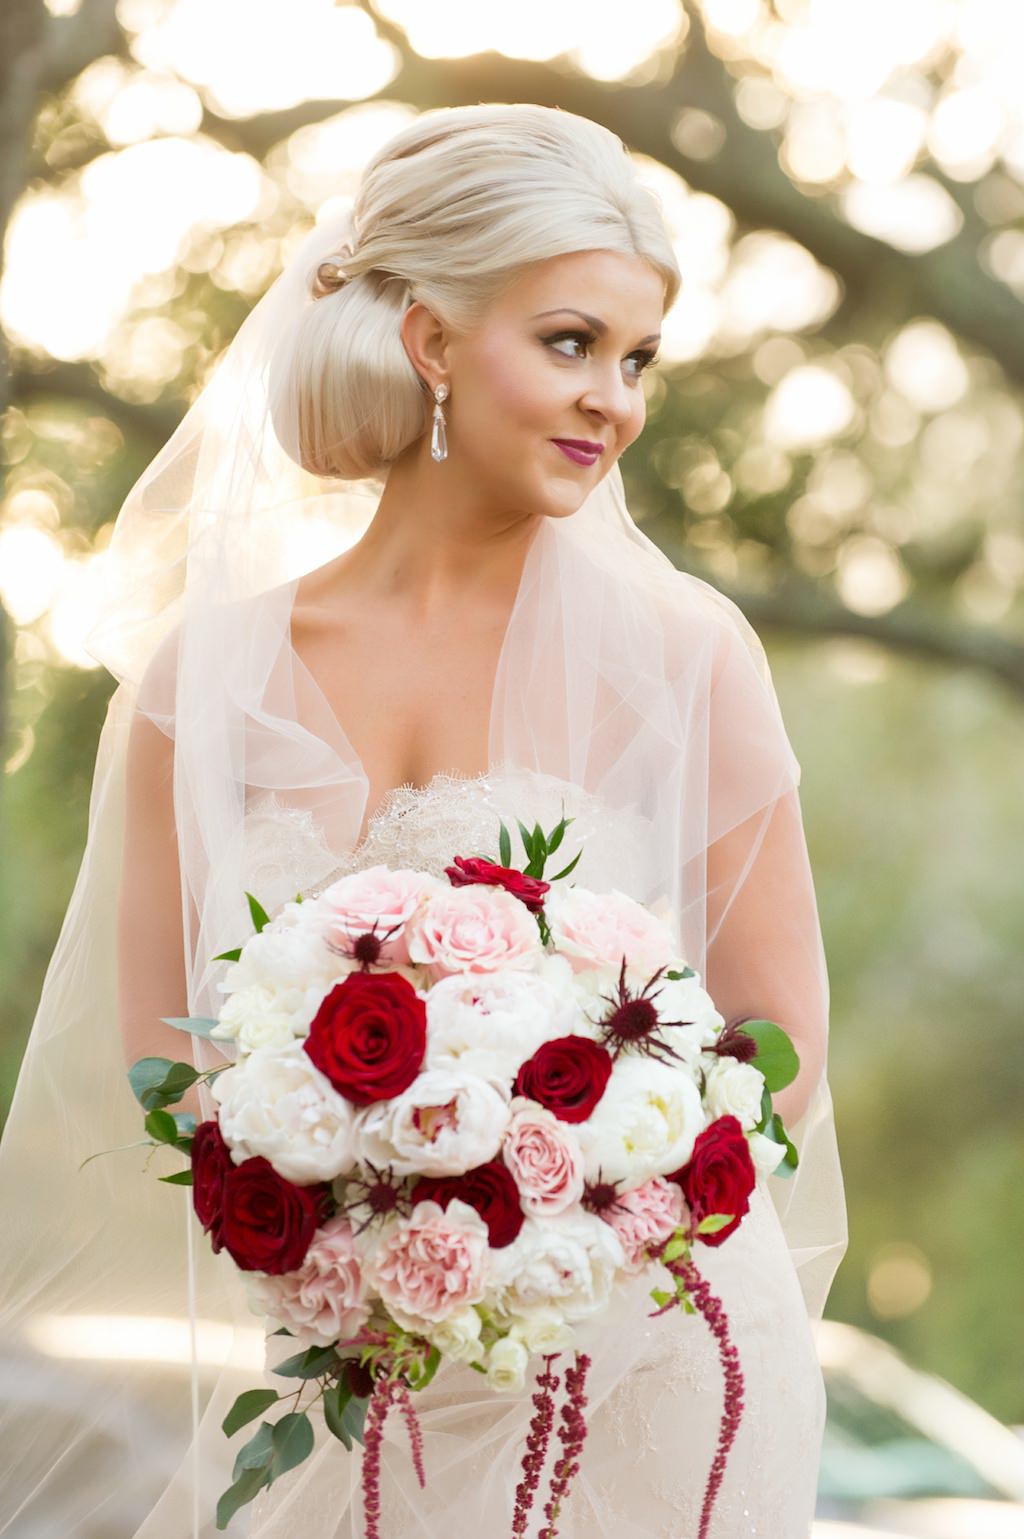 Outdoor Park Bridal Portrait in Blush Pink Strapless Wedding Dress with Red Rose, Blush Pink and White Floral and Greenery Bouquet | Tampa Bay Wedding Photographer Andi Diamond Photography | Hair and Makeup Michele Renee The Studio